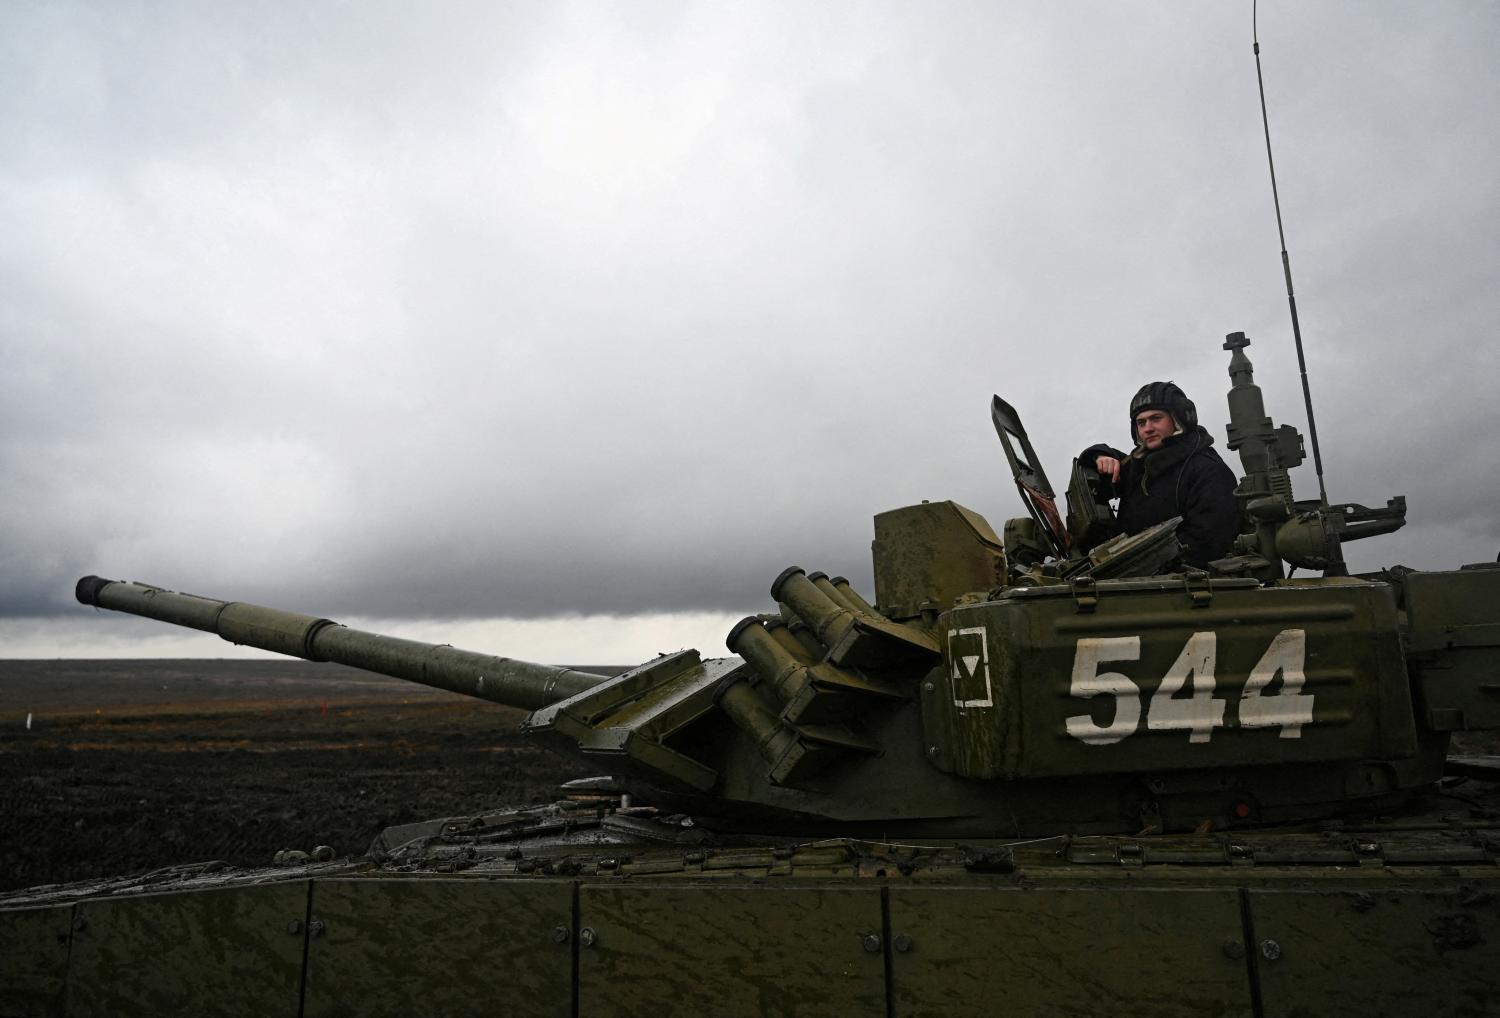 FILE PHOTO: A Russian service member is seen atop a T-72B3 main battle tank during military drills at the Kadamovsky range in the Rostov region, Russia December 20, 2021. REUTERS/Sergey Pivovarov/File Photo